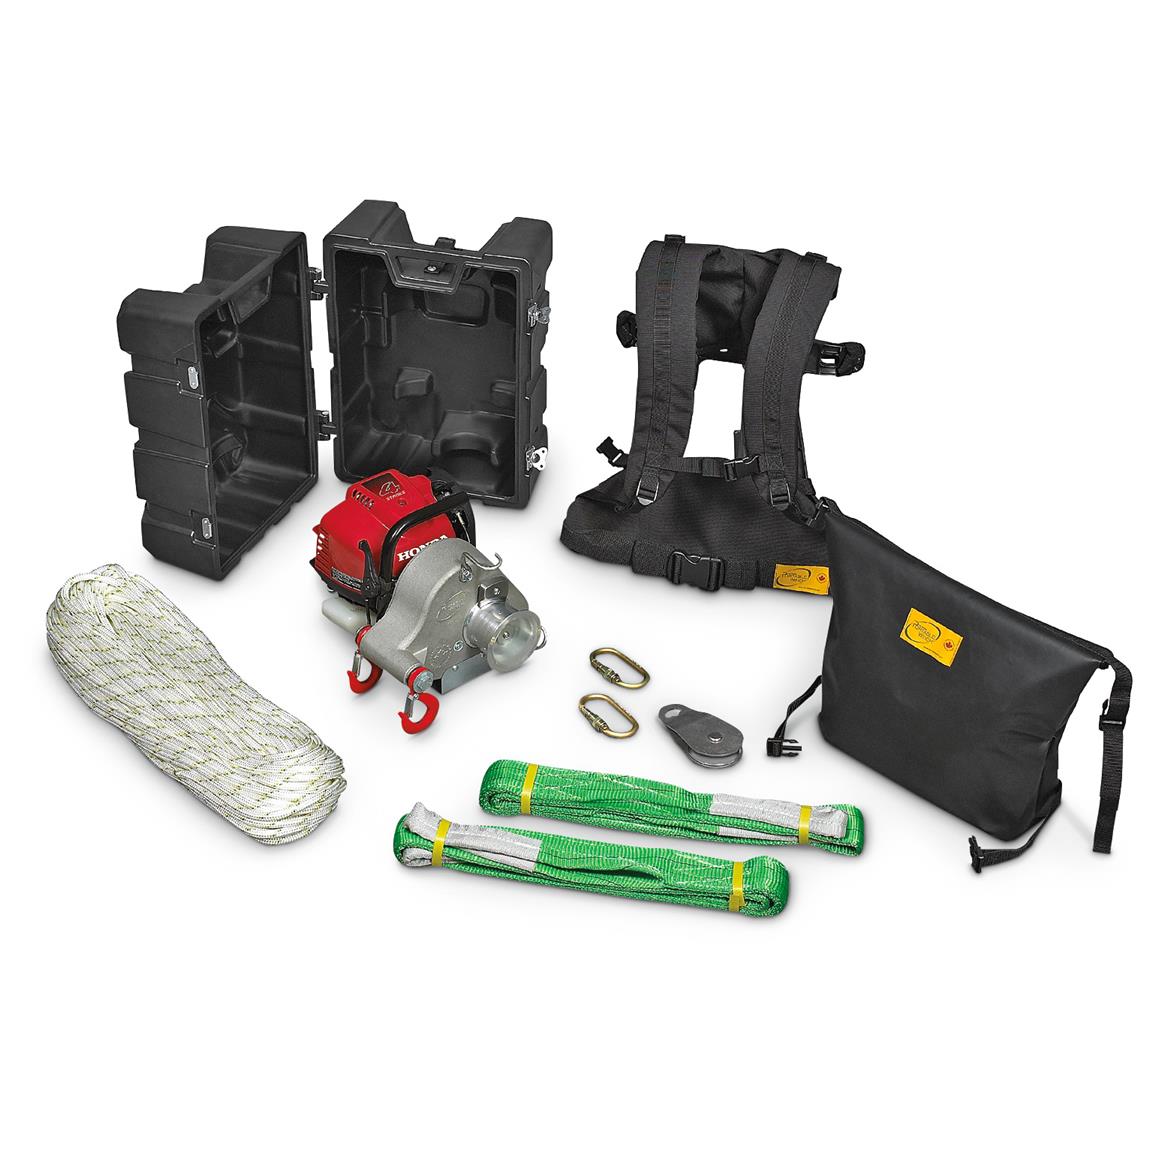 Portable Winch Co. PCW3000-HK 1,550-lb. Gas-powered Portable Winch Hunting Kit